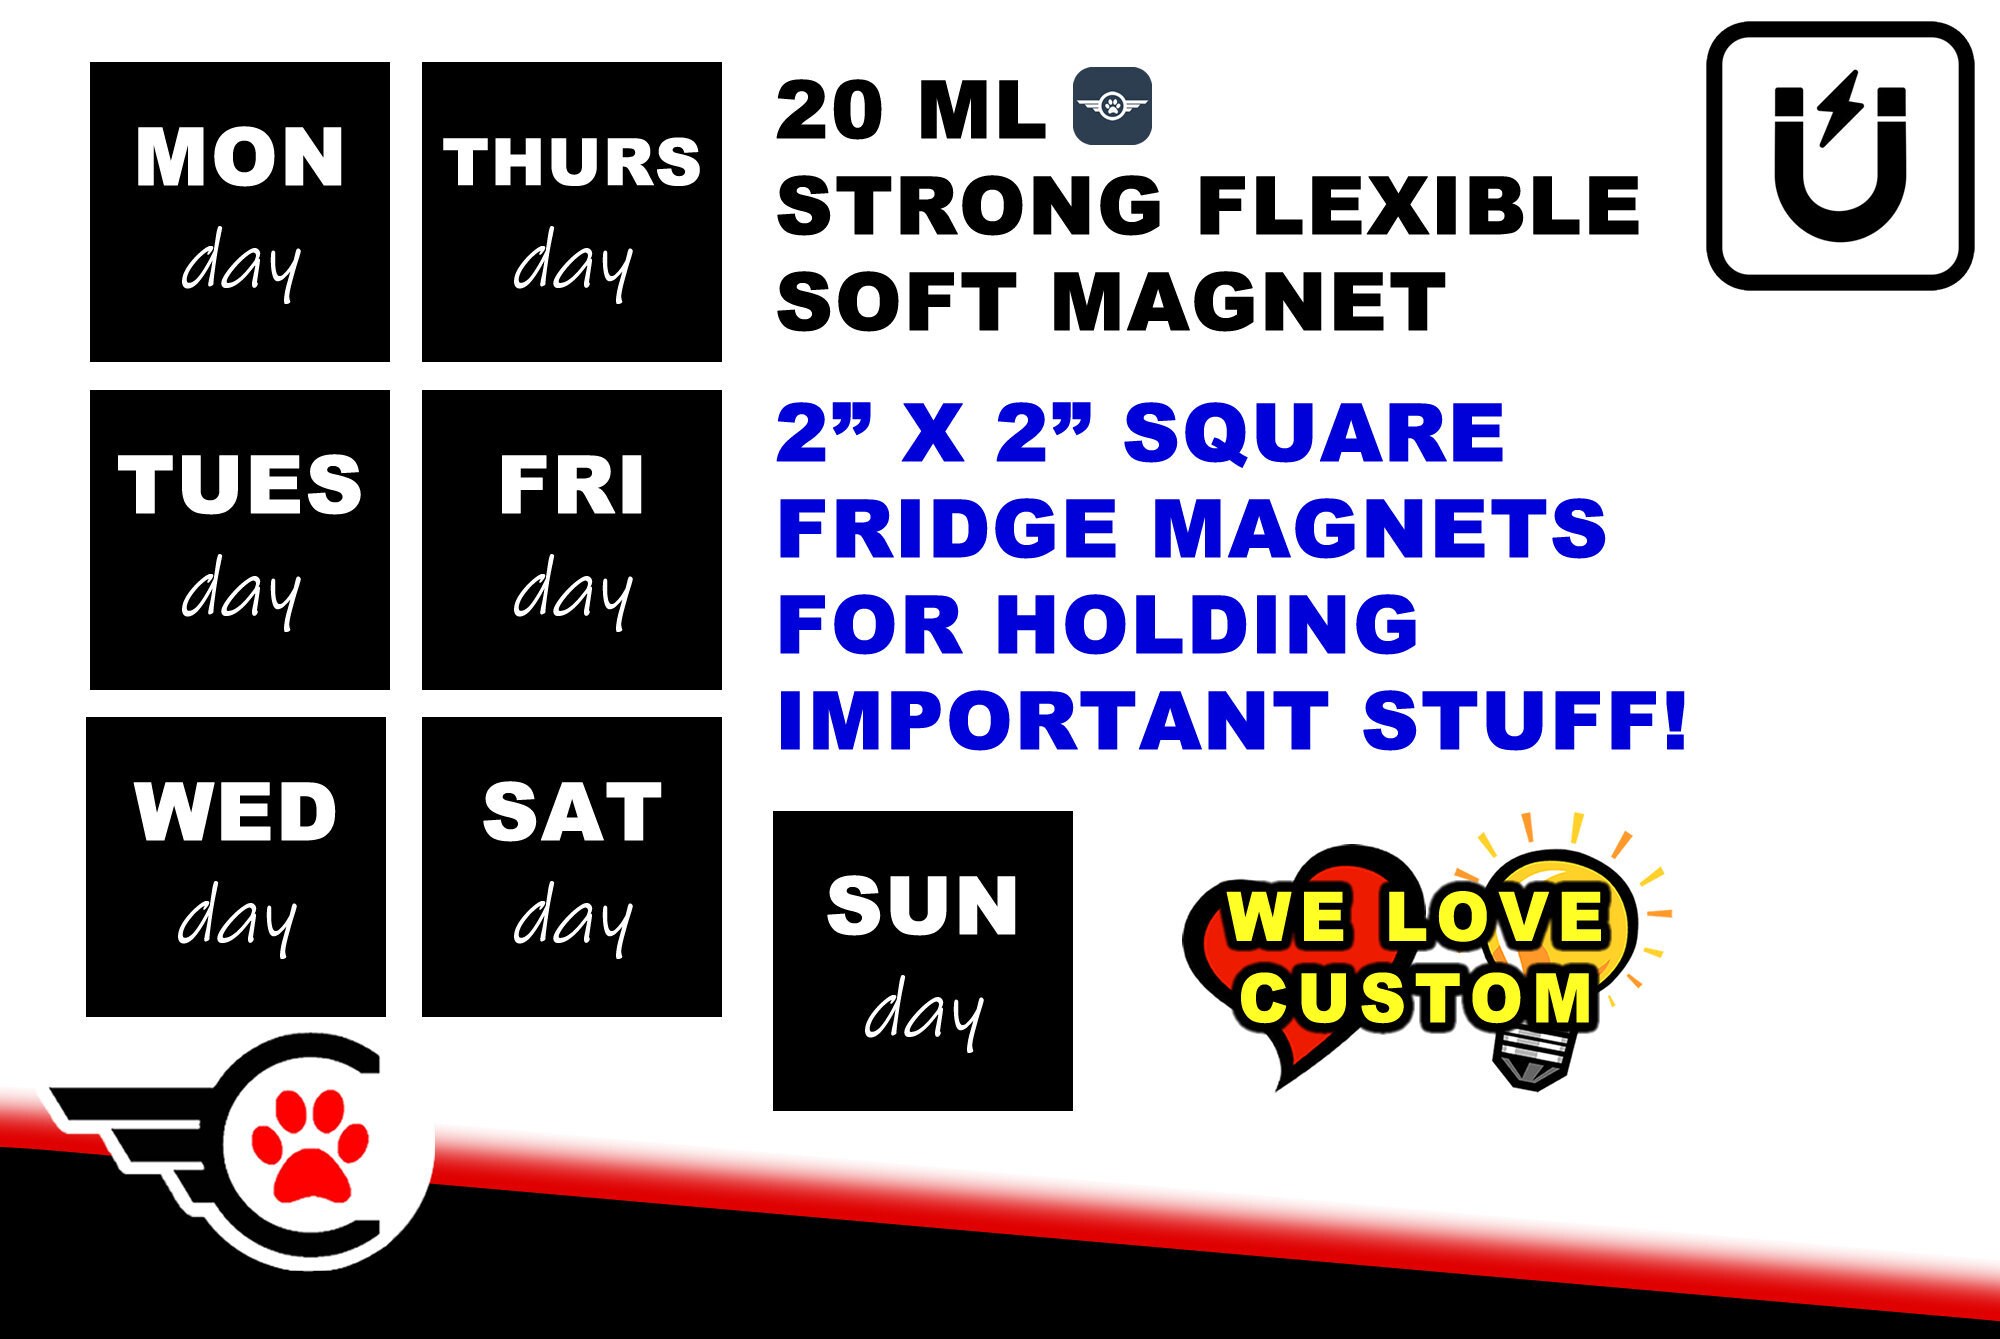 2 inch x 2 inch strong flexible soft fridge magnets, each day of the week 7 in total, black background full laminate coating. we do custom!